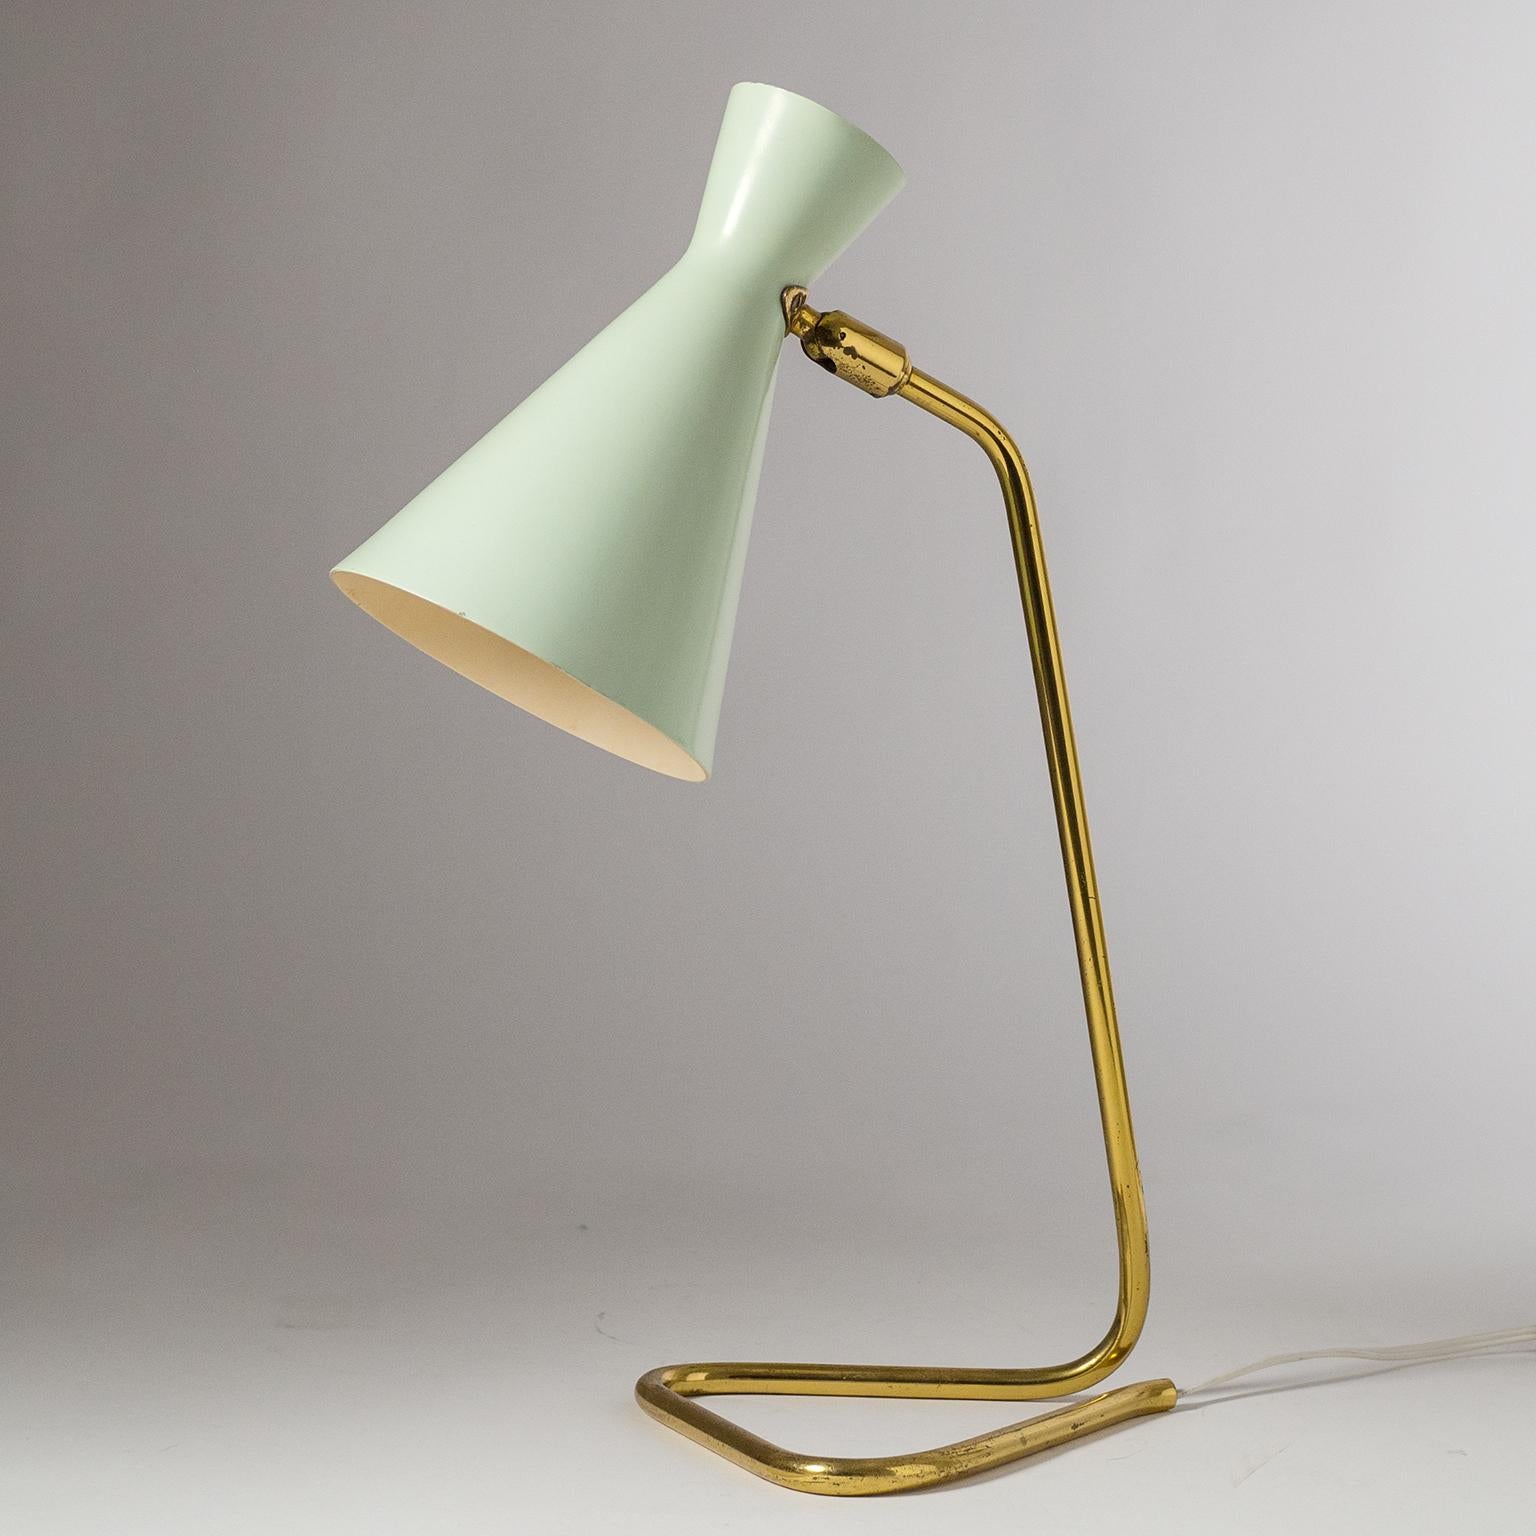 Beautiful mid century table or desk lamp by BAG Turgi, Switzerland, 1950s. The aluminum double cone shade has its original paint which is in very good condition: a very light mint on the outside and a pale peach on the inside which casts a warm and